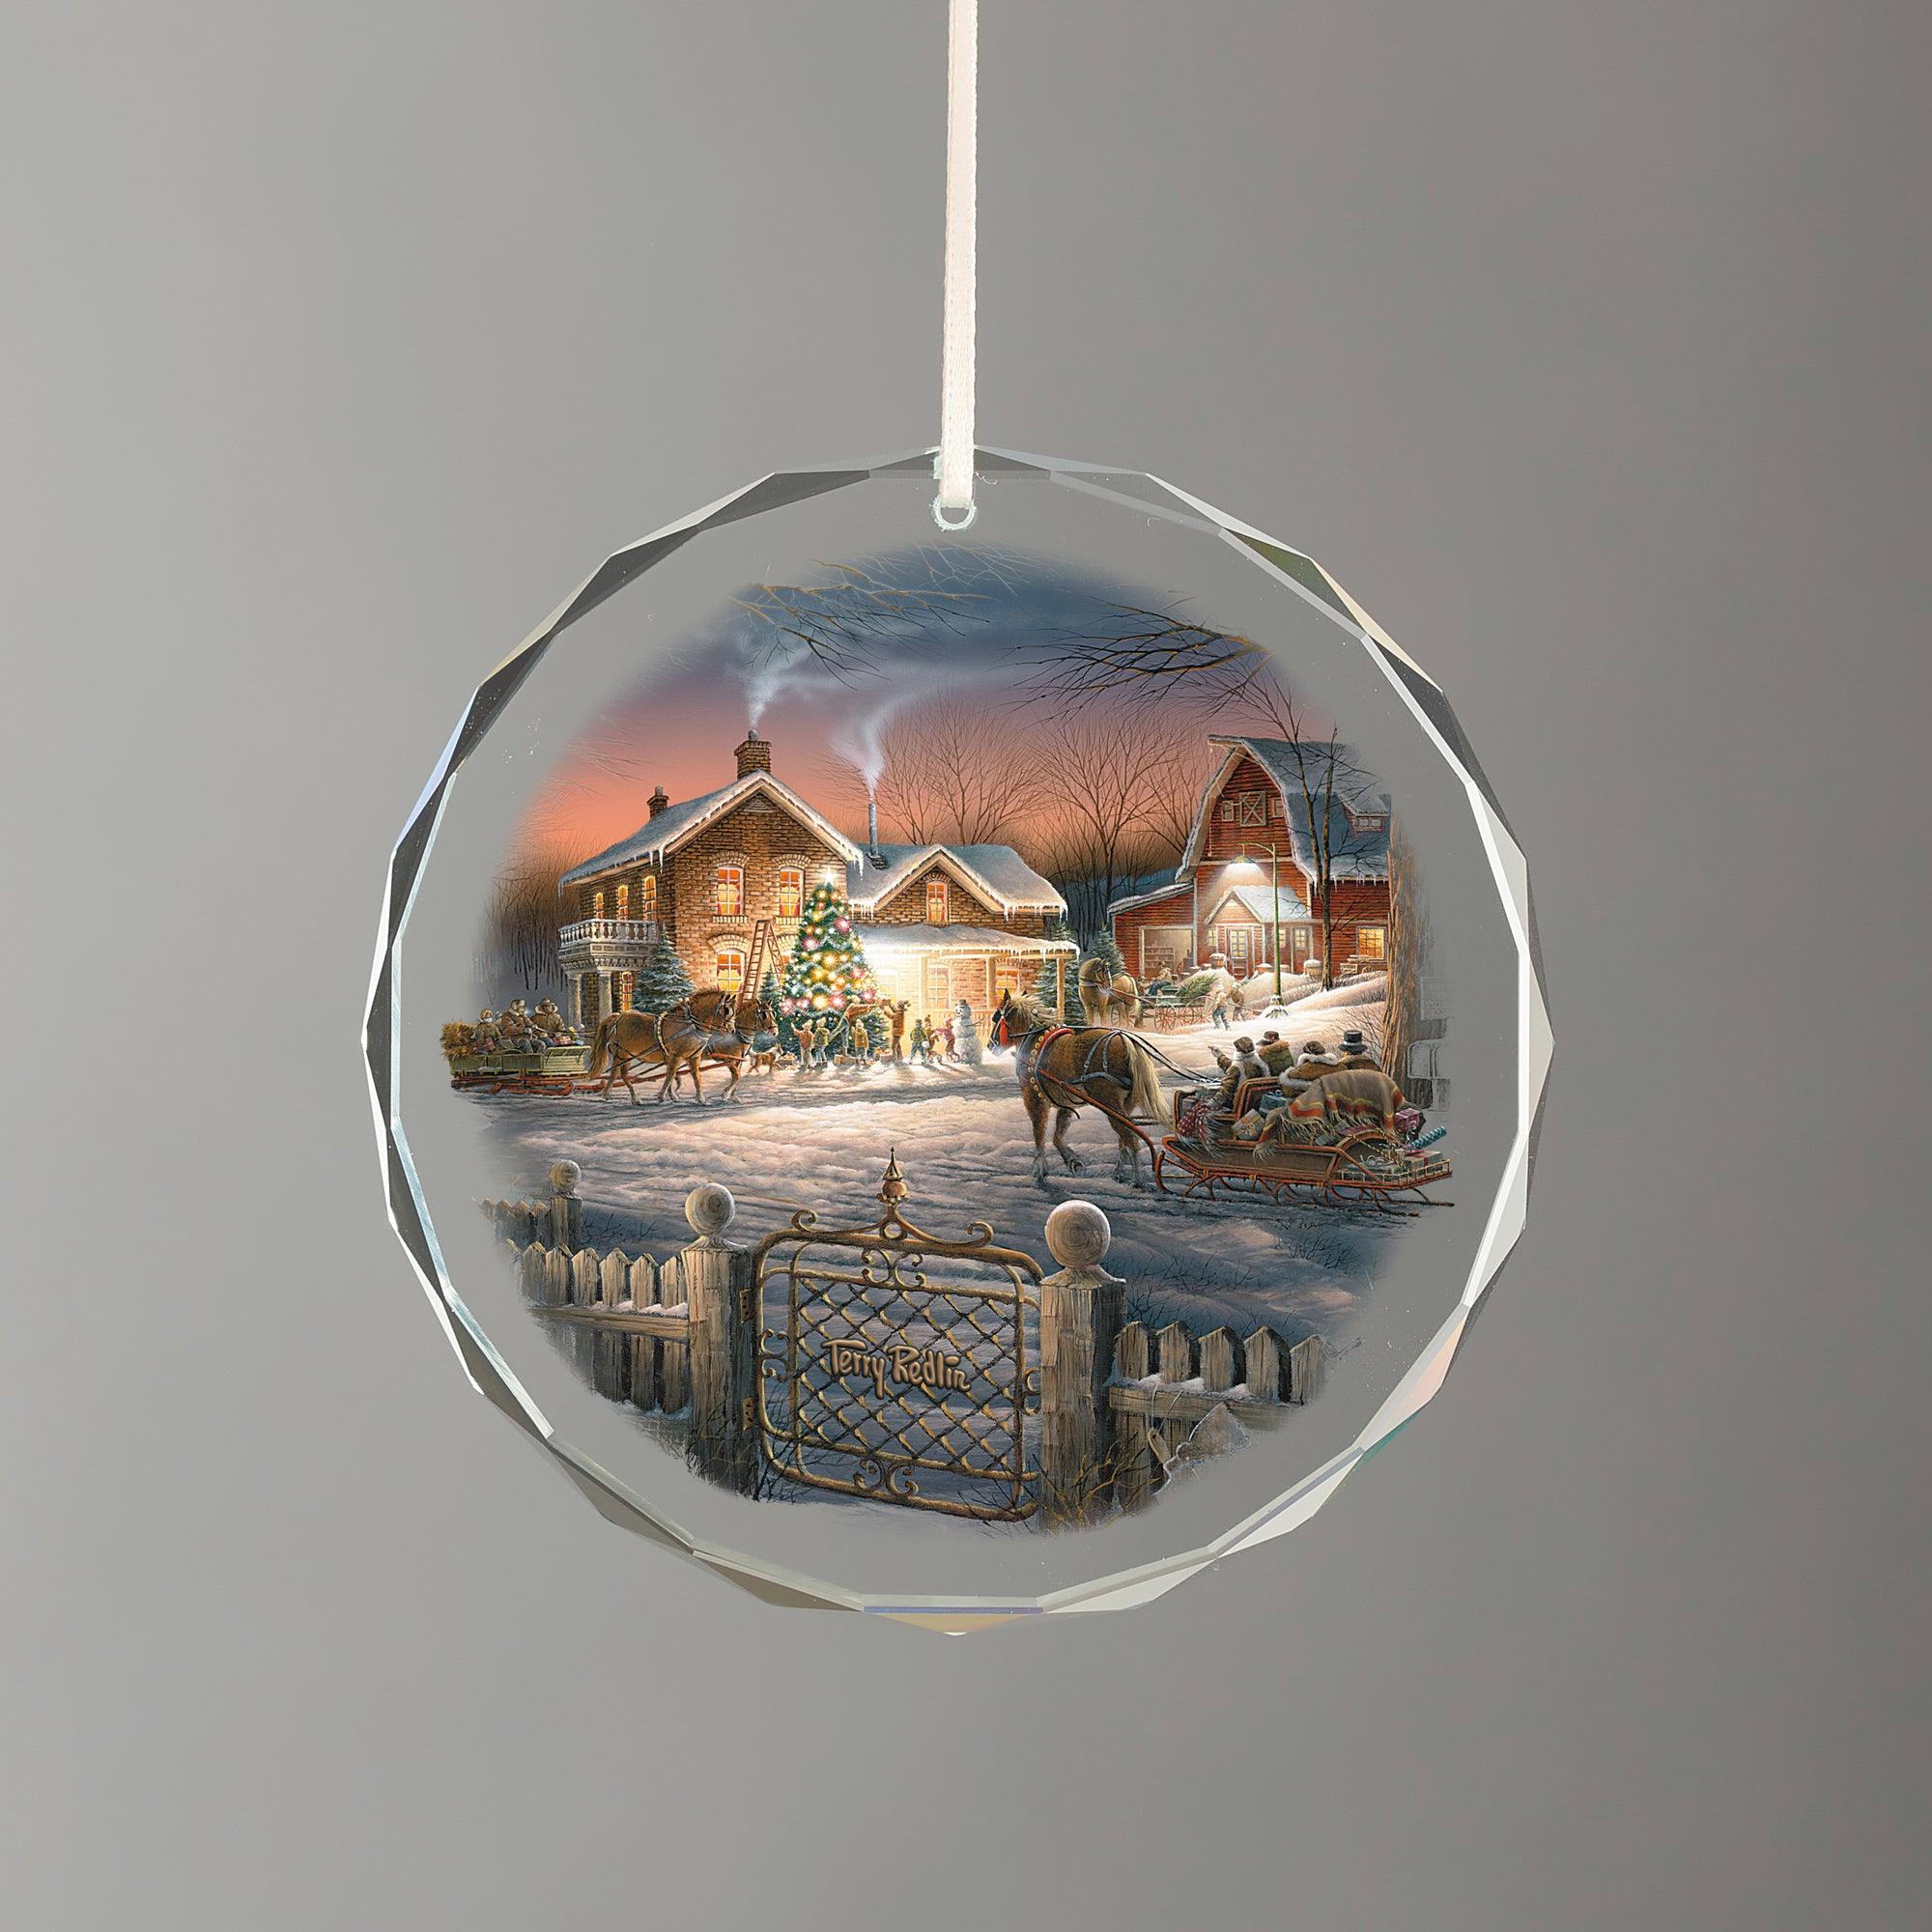 Trimming the Tree Round Glass Ornament - Wild Wings